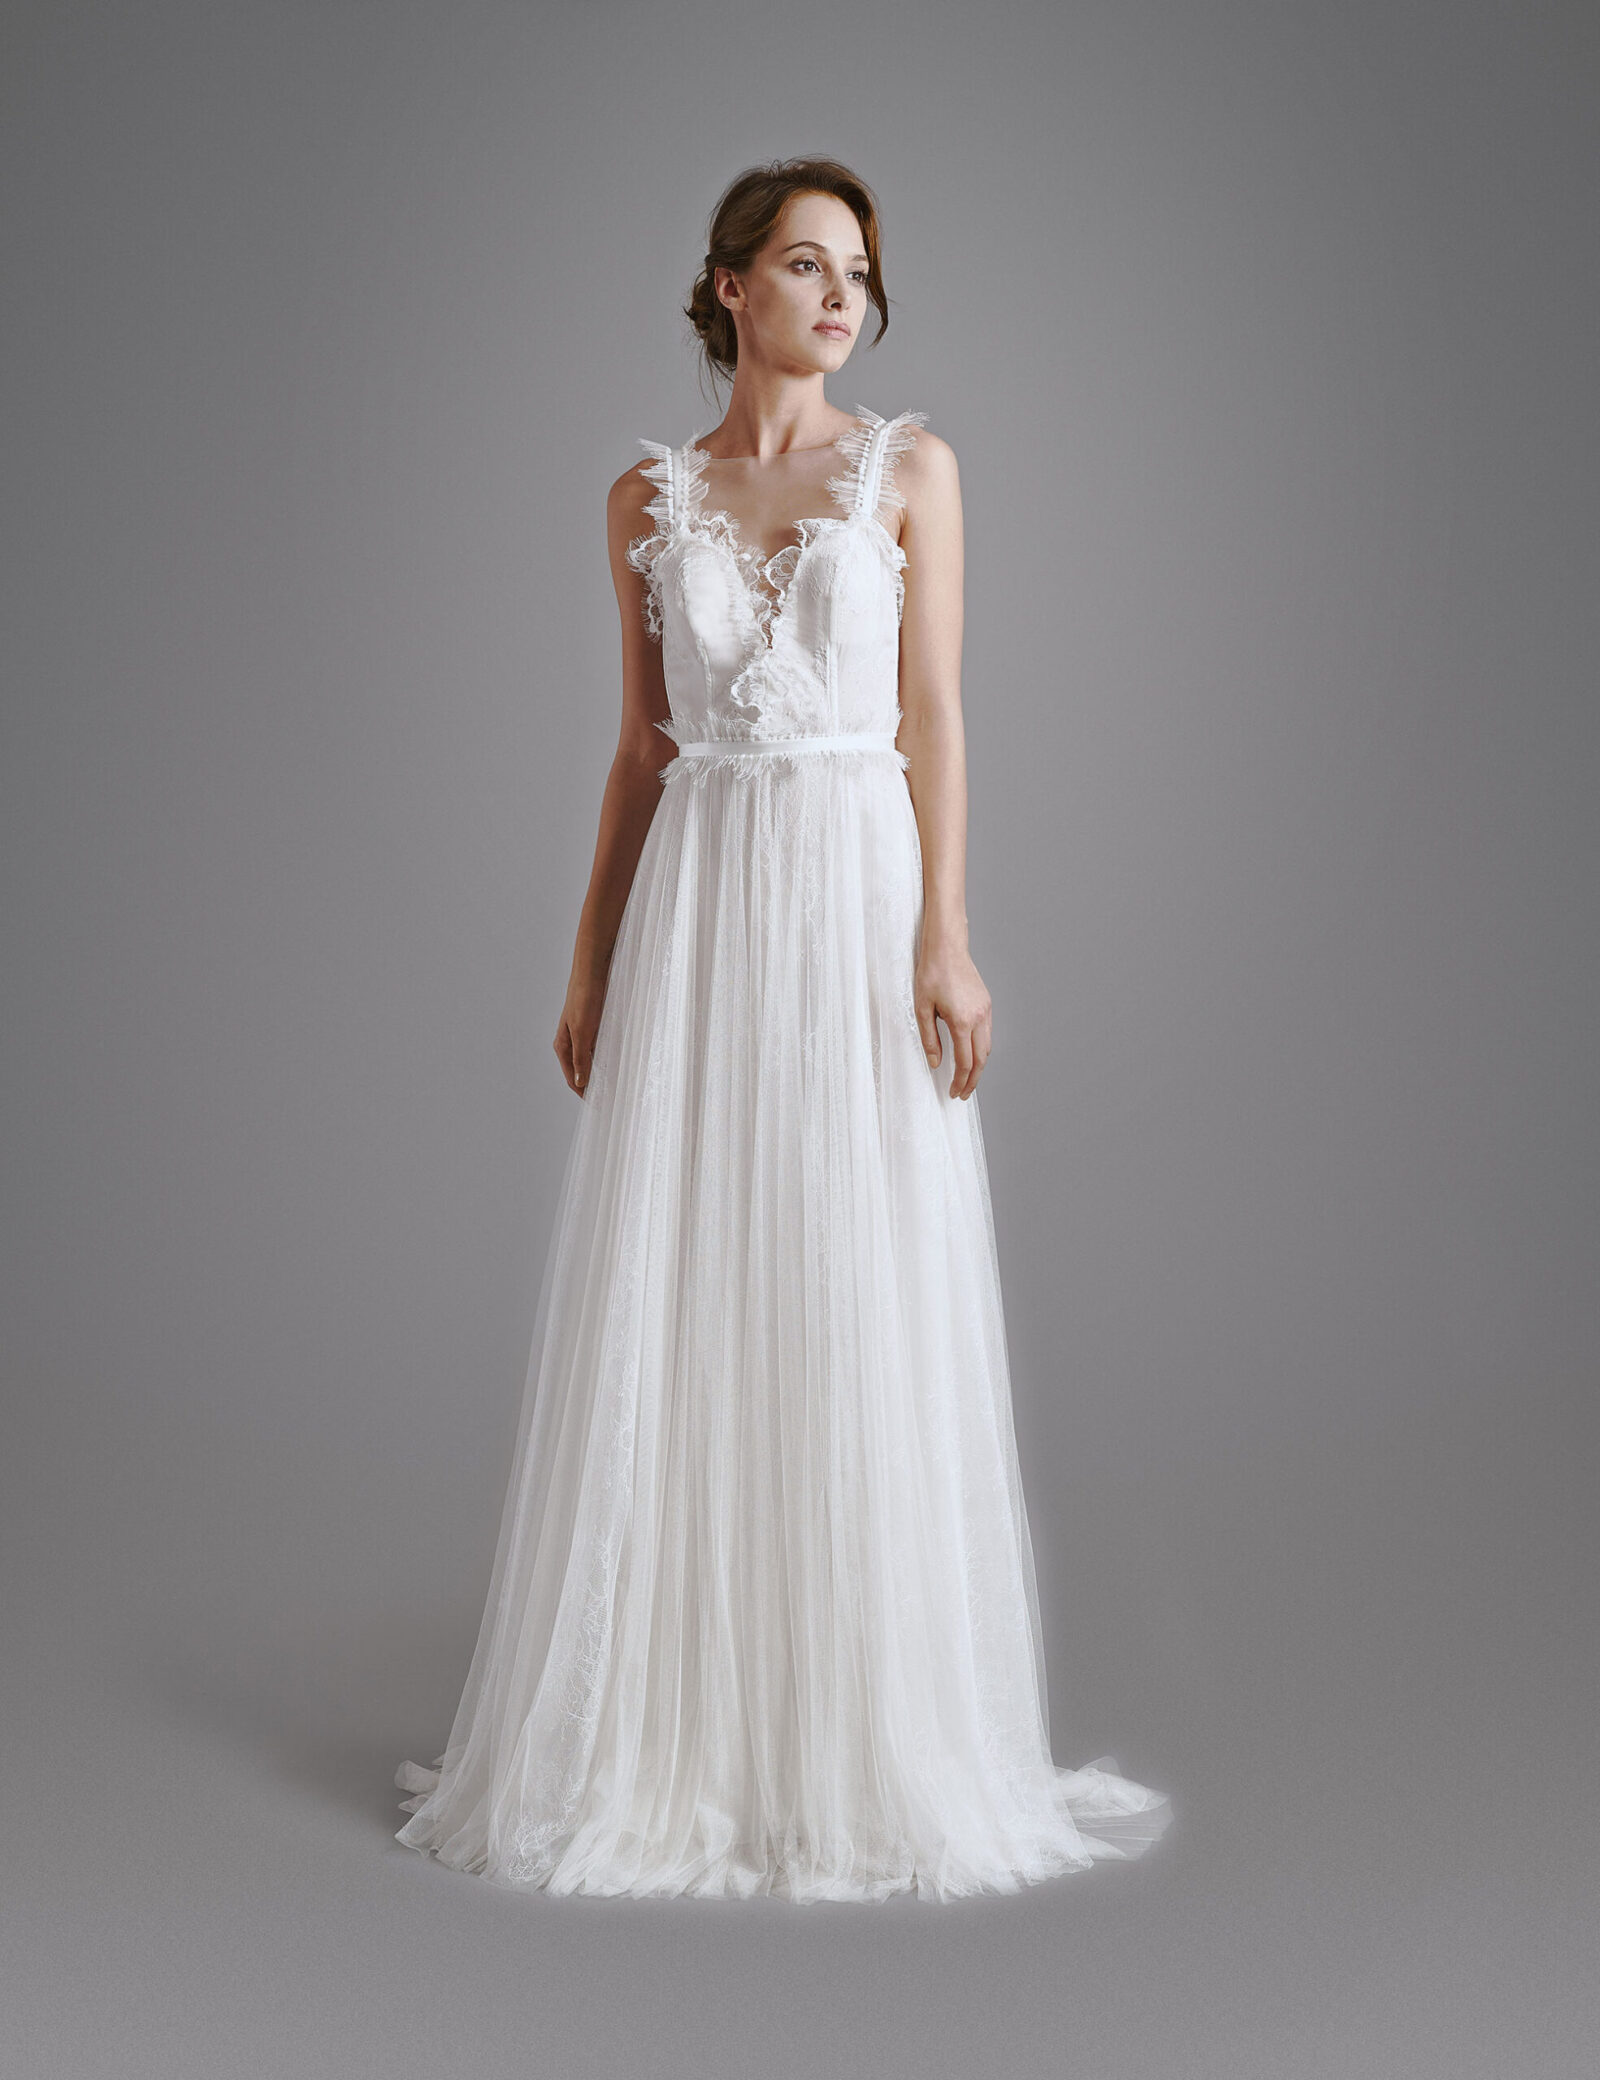 Romantic wedding dress WILLOW BUTERFLY BHARB-WILLOW-BUTTERFLY-BH2020-0005-002-tall